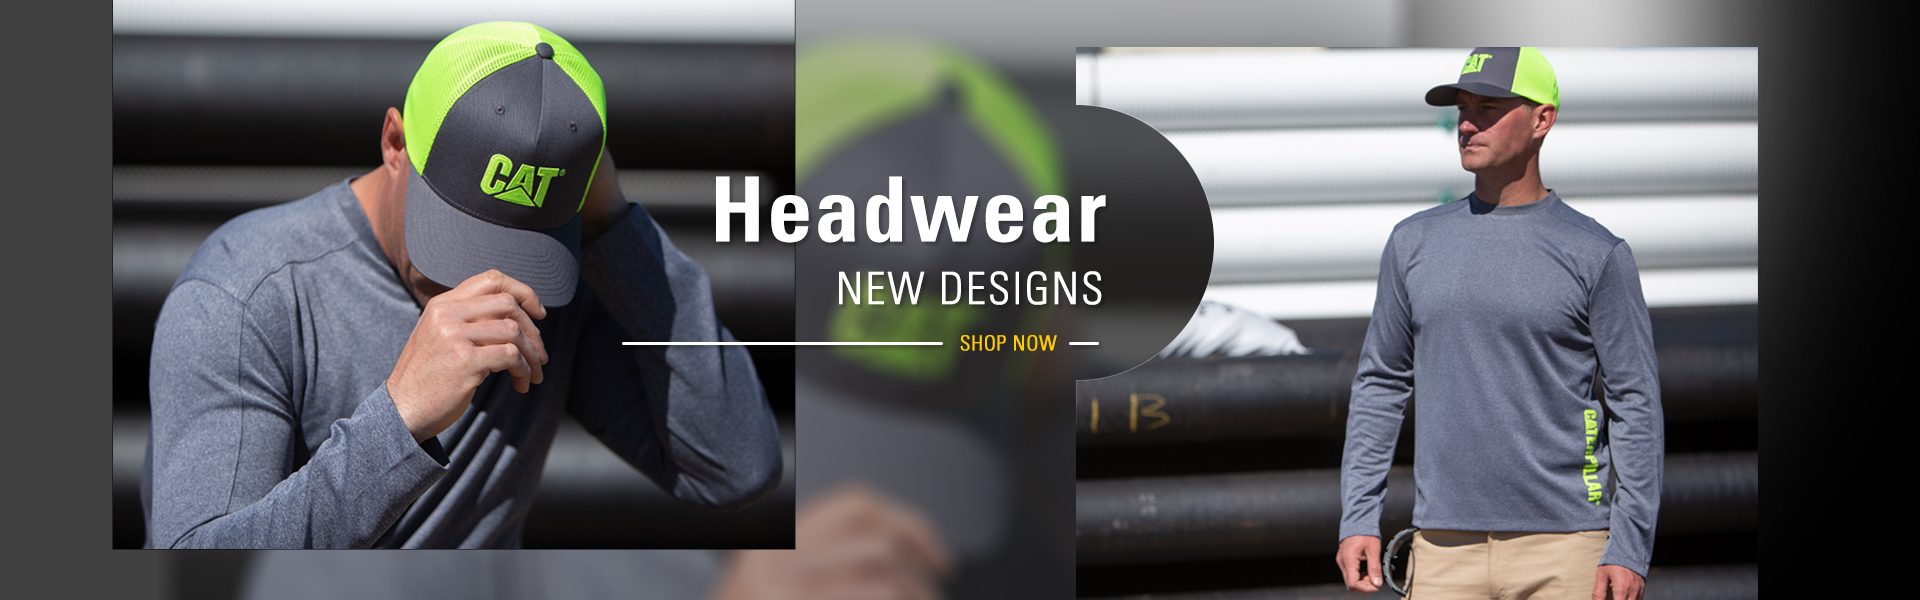 https://store.ringpower.com/images/thumbs/0004037_Home-Page-Slide-(Headwear)-Web-Ready.jpeg